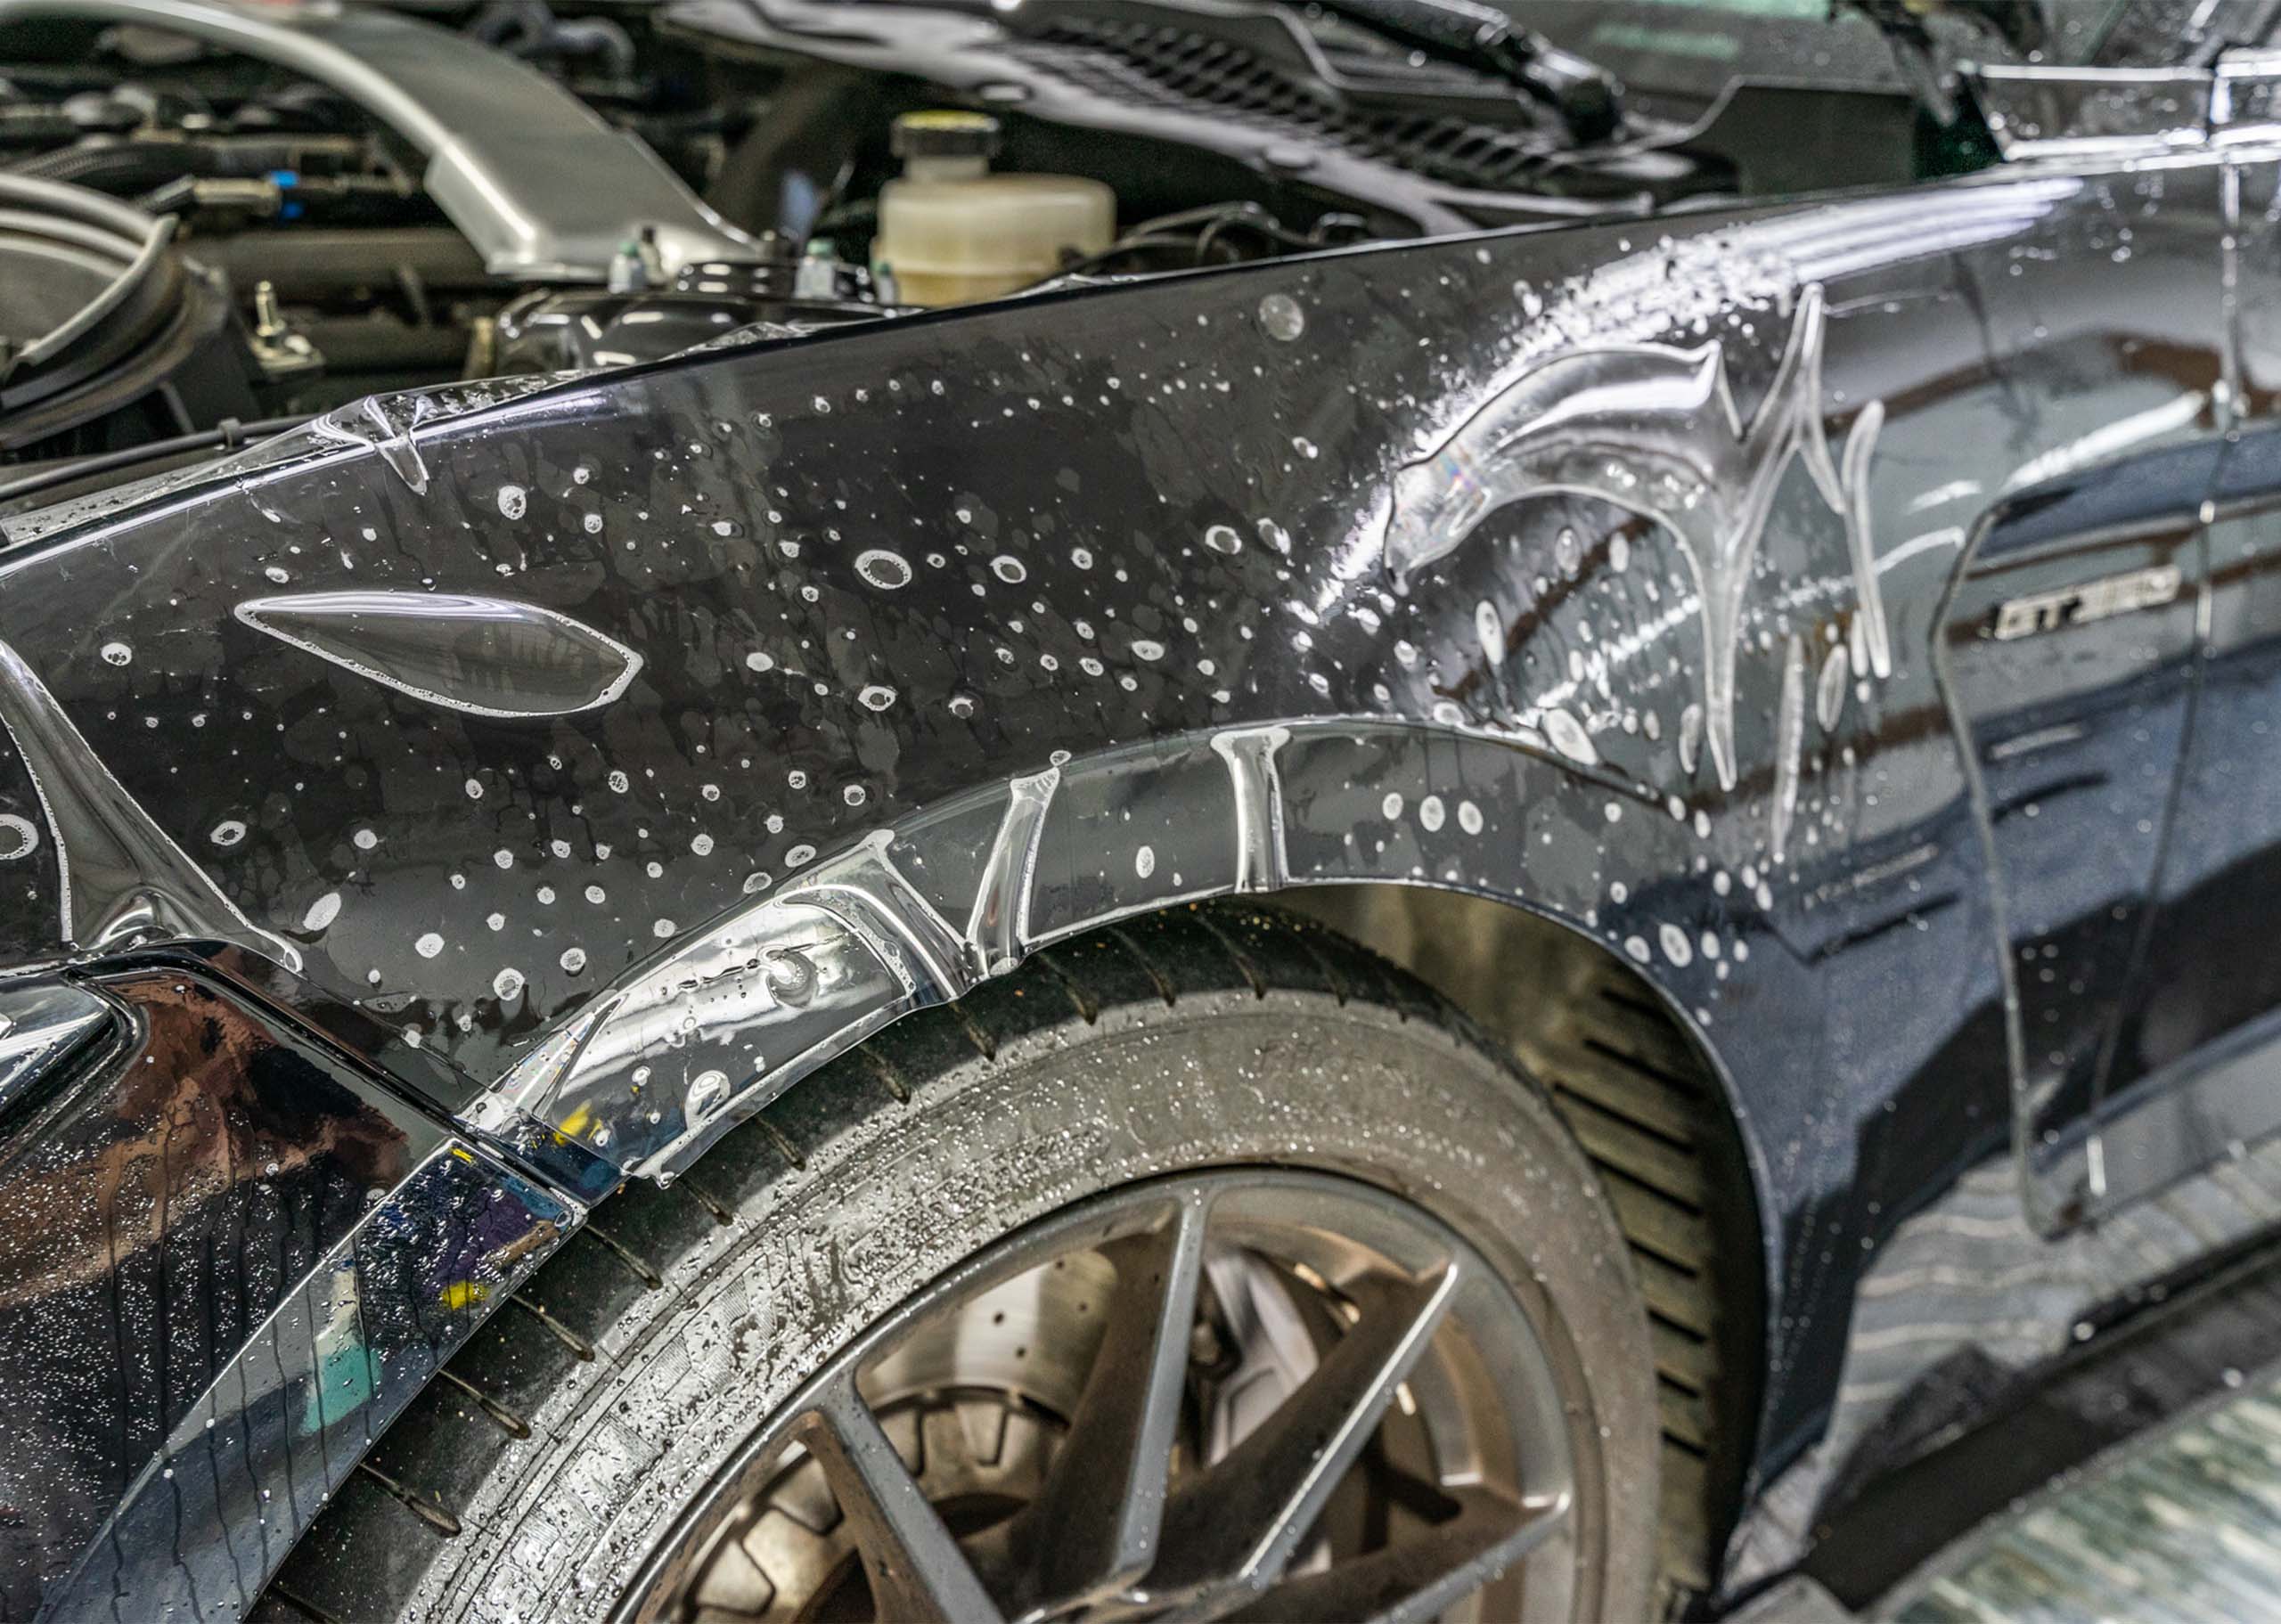 View the XPEL paint protection film coverage options